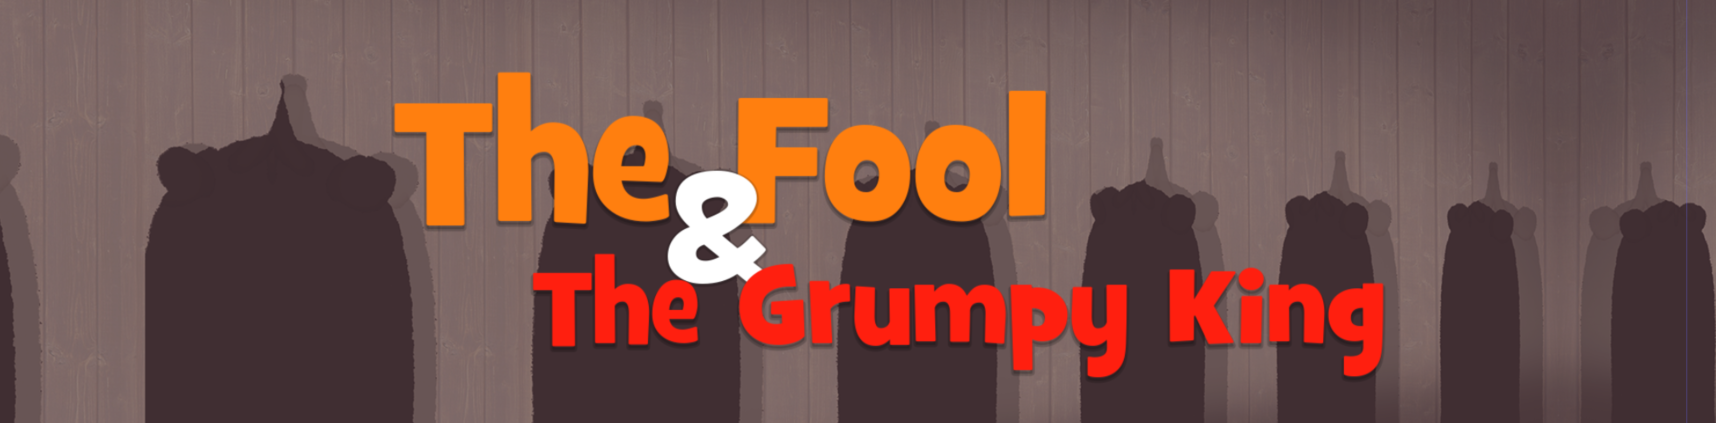 The Fool and The Grumpy King